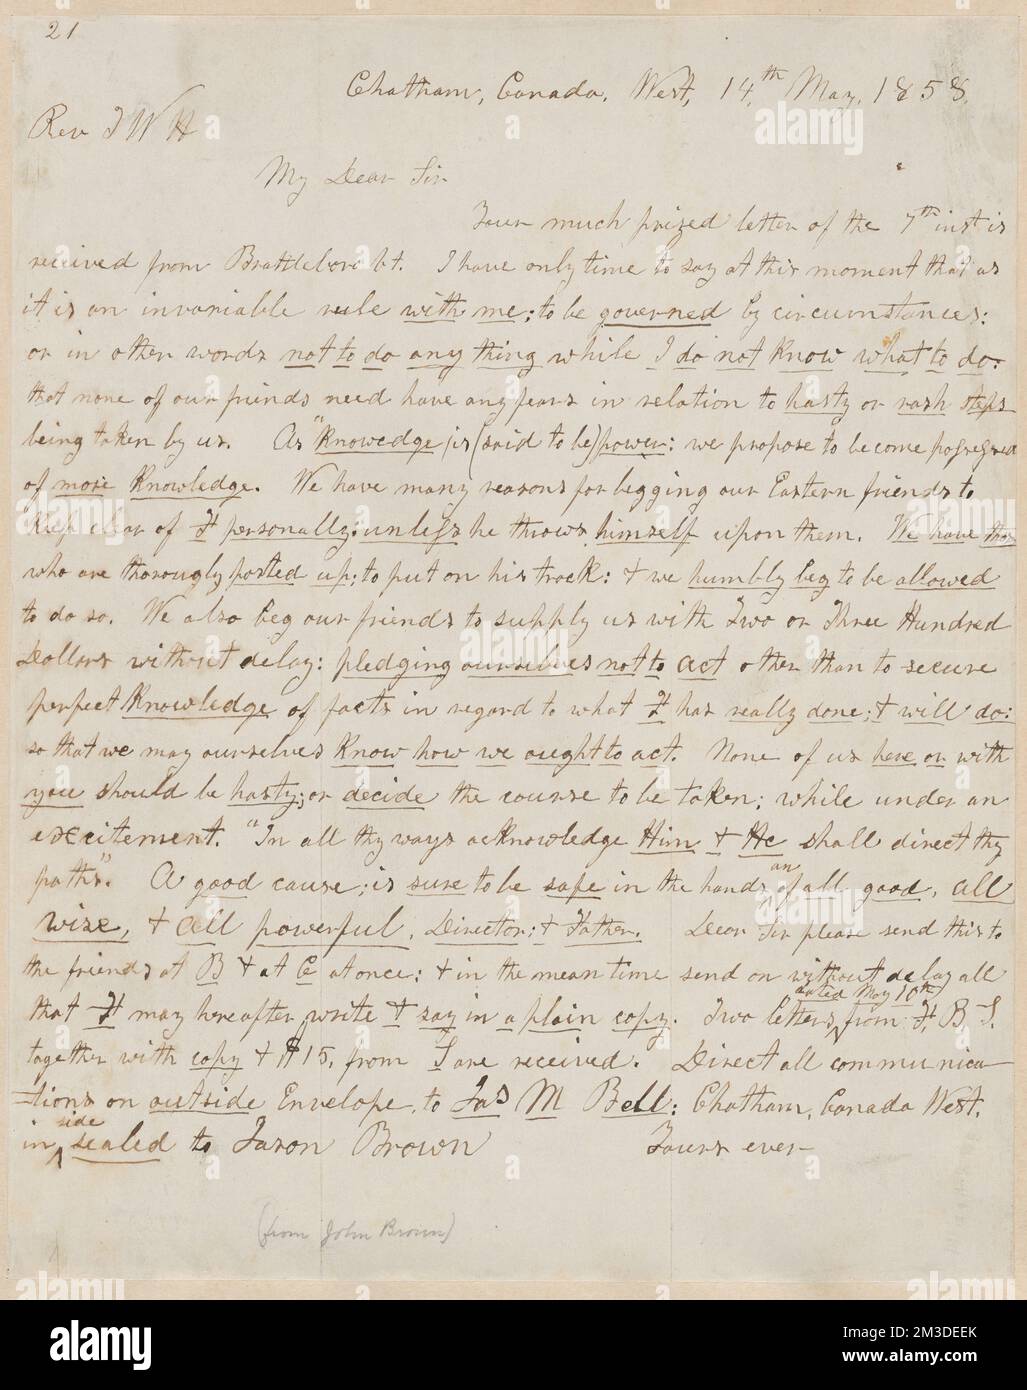 John Brown autograph letter to Thomas Wentworth Higginson, Chatham, Canada West., 14 May 1858 , Abolitionists, United States, Antislavery movements, United States, History, 19th century, Harpers Ferry W. Va., History, John Brown's Raid, 1859, Forbes, Hugh, active approximately 1848-approximately 1857. John Brown- Correspondence relating to John Brown and the raid on Harpers Ferry Stock Photo